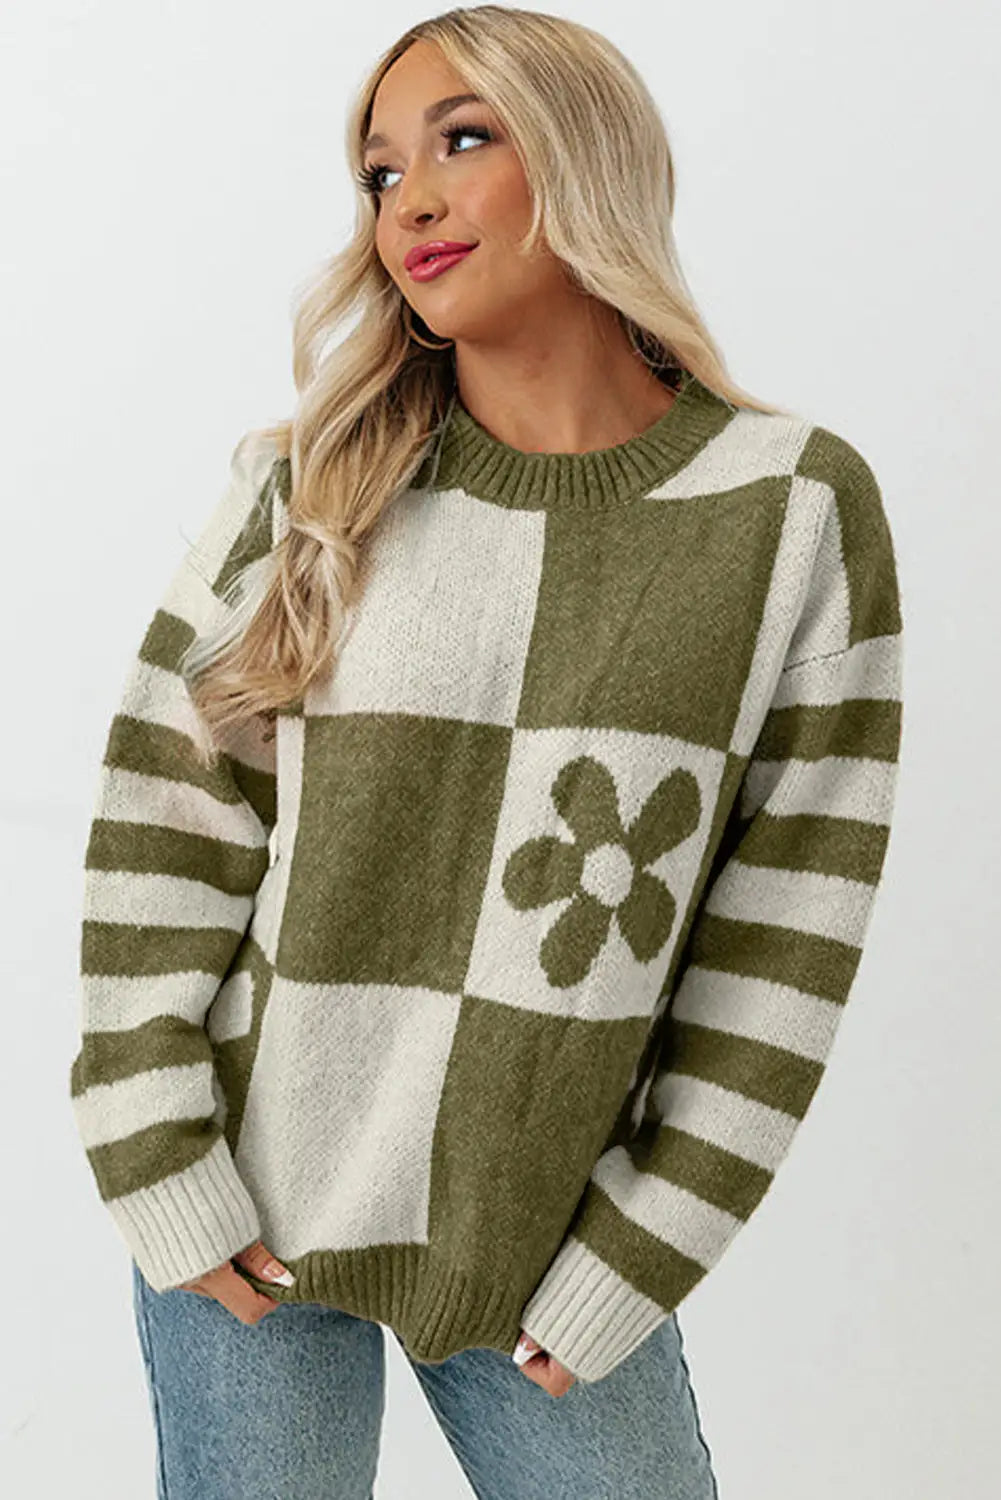 Brown checkered floral print striped sleeve sweater - tops